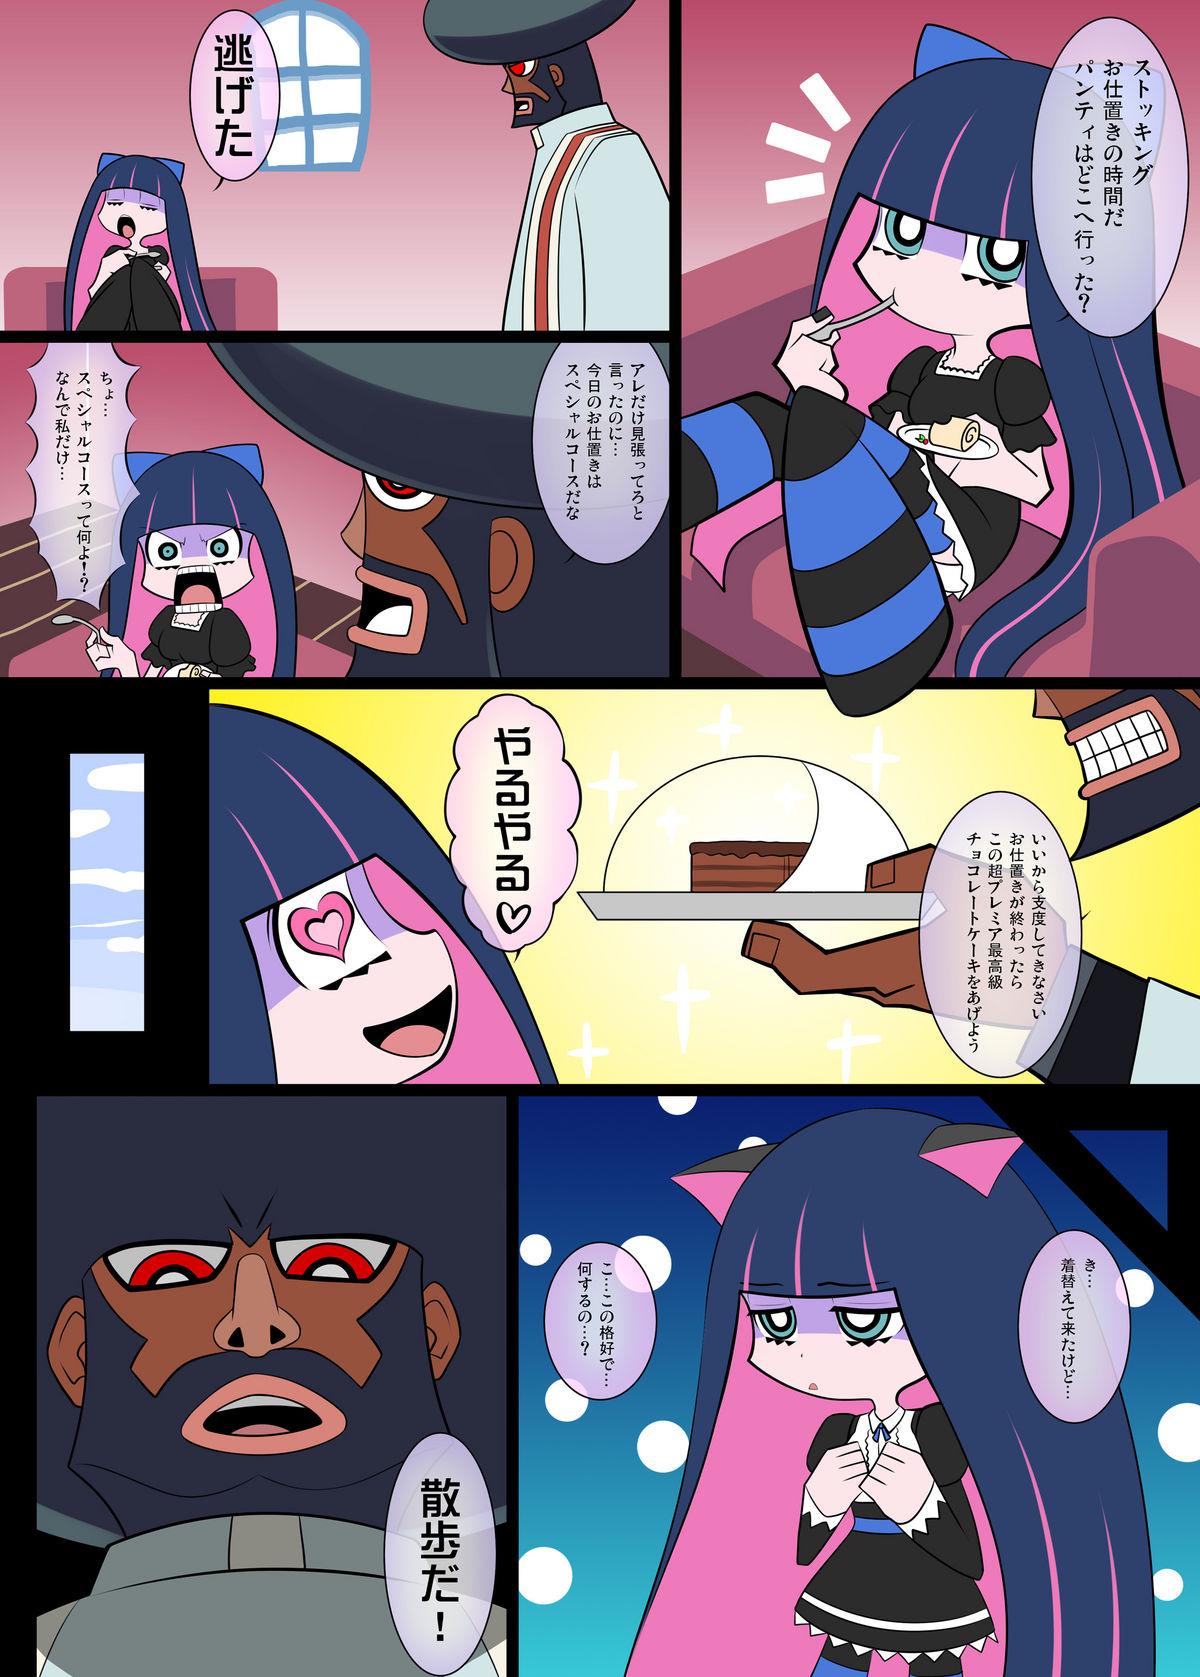 Petite Teen Sperma & Sweets with Villager - Panty and stocking with garterbelt Amateur Cumshots - Page 3